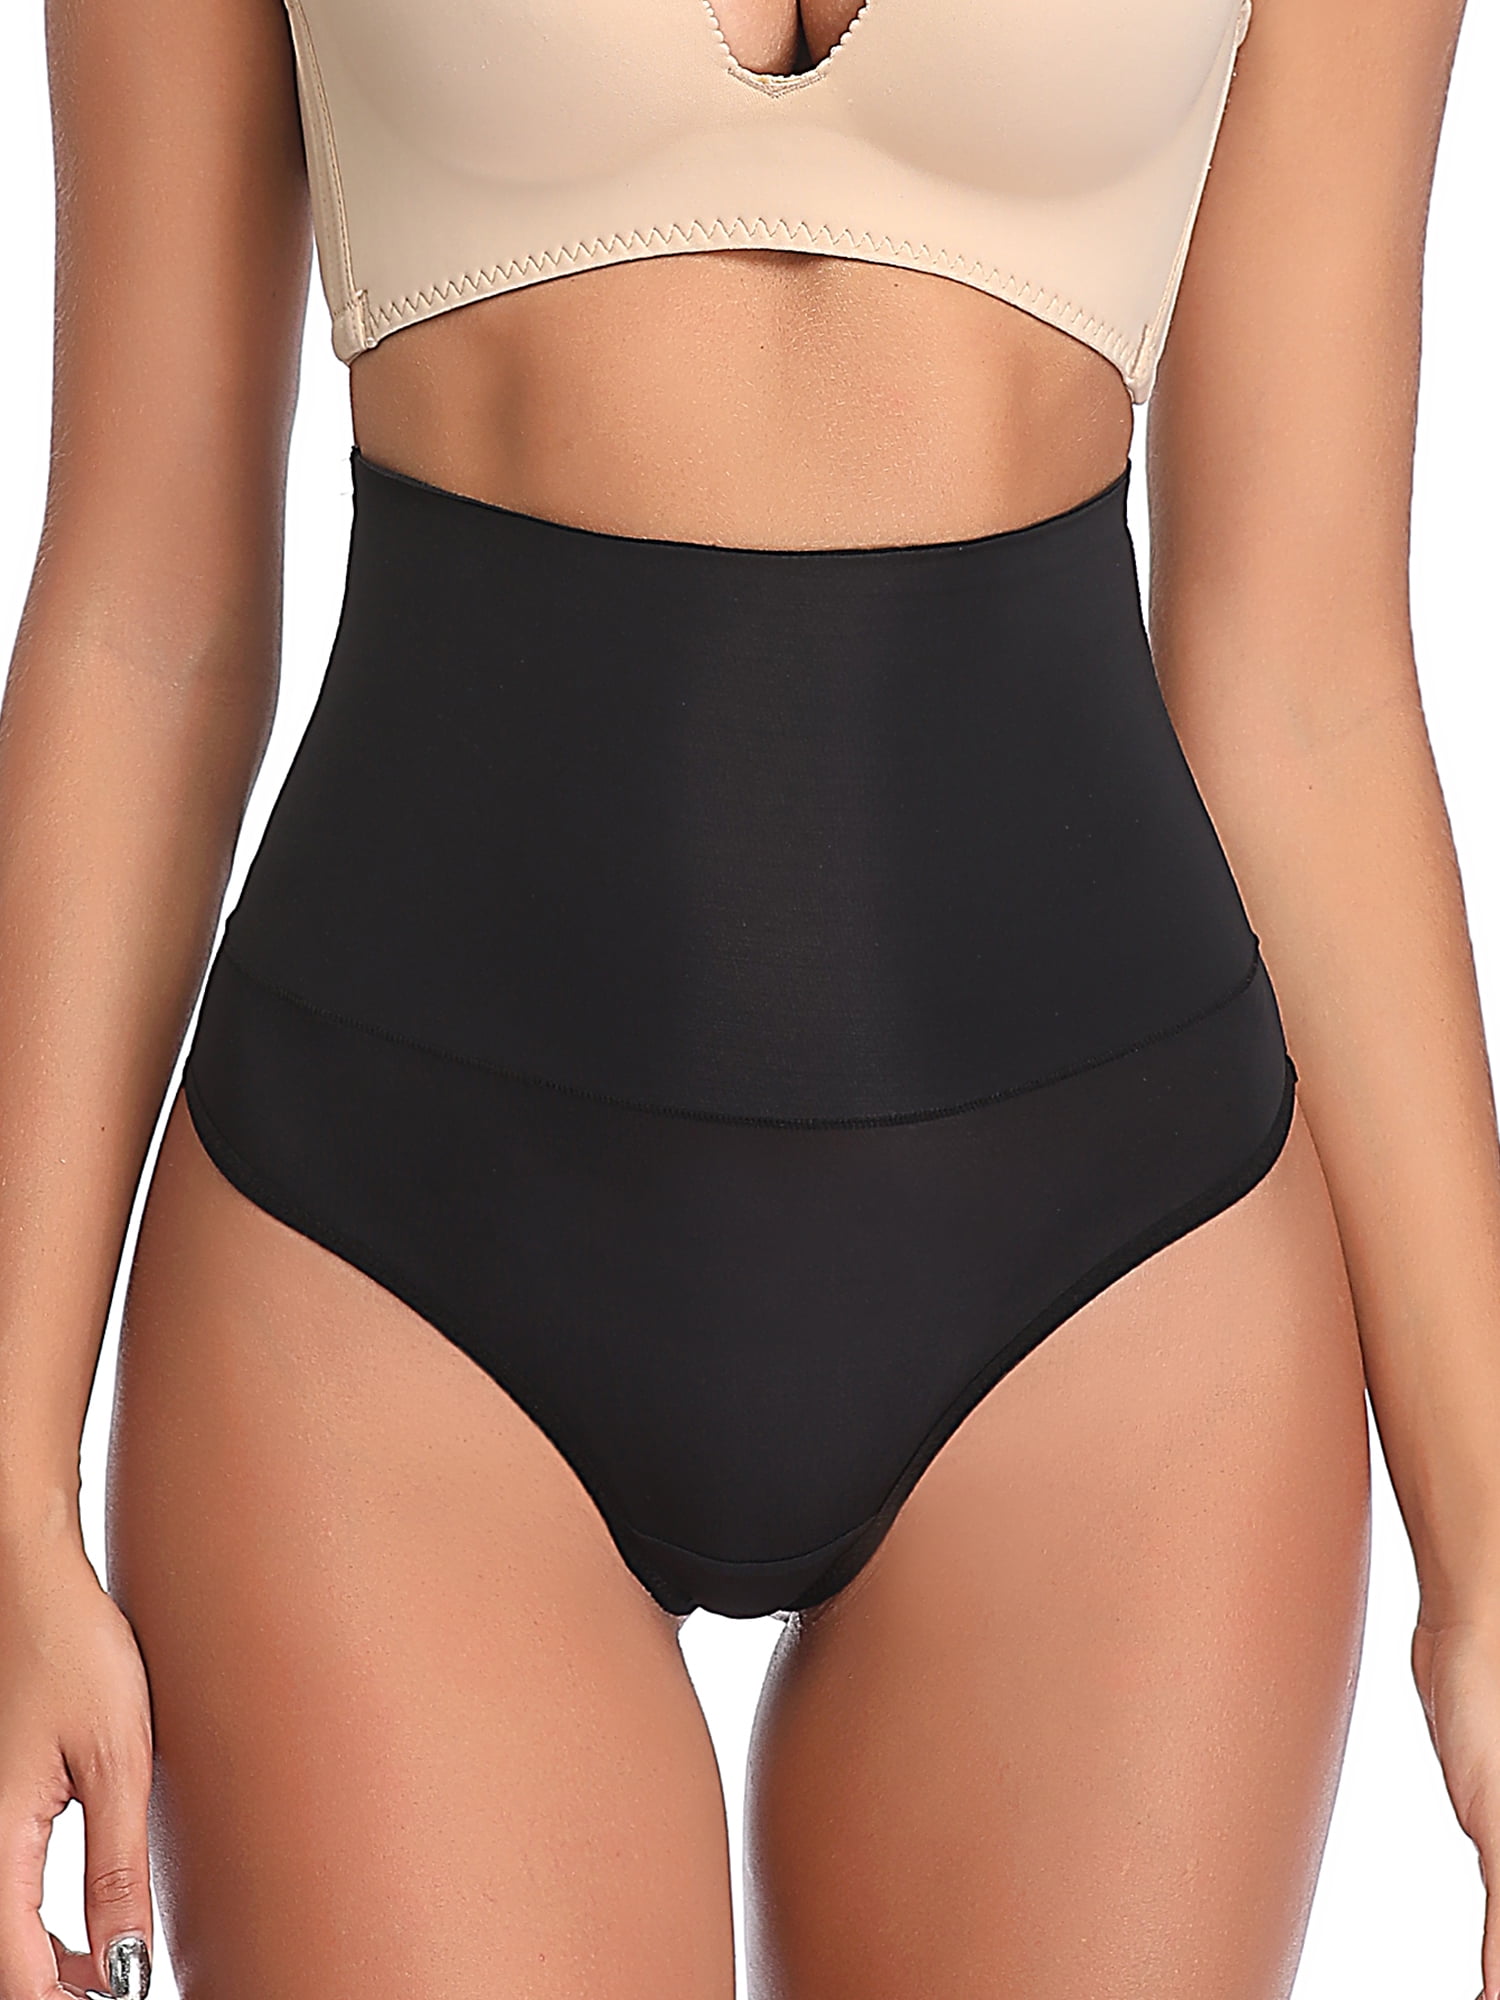 Joyshaper Womens High Waist Thong Sexy Control Seamless Body Shaper Shorts  For Training And Slimming From Hairlove, $9.91